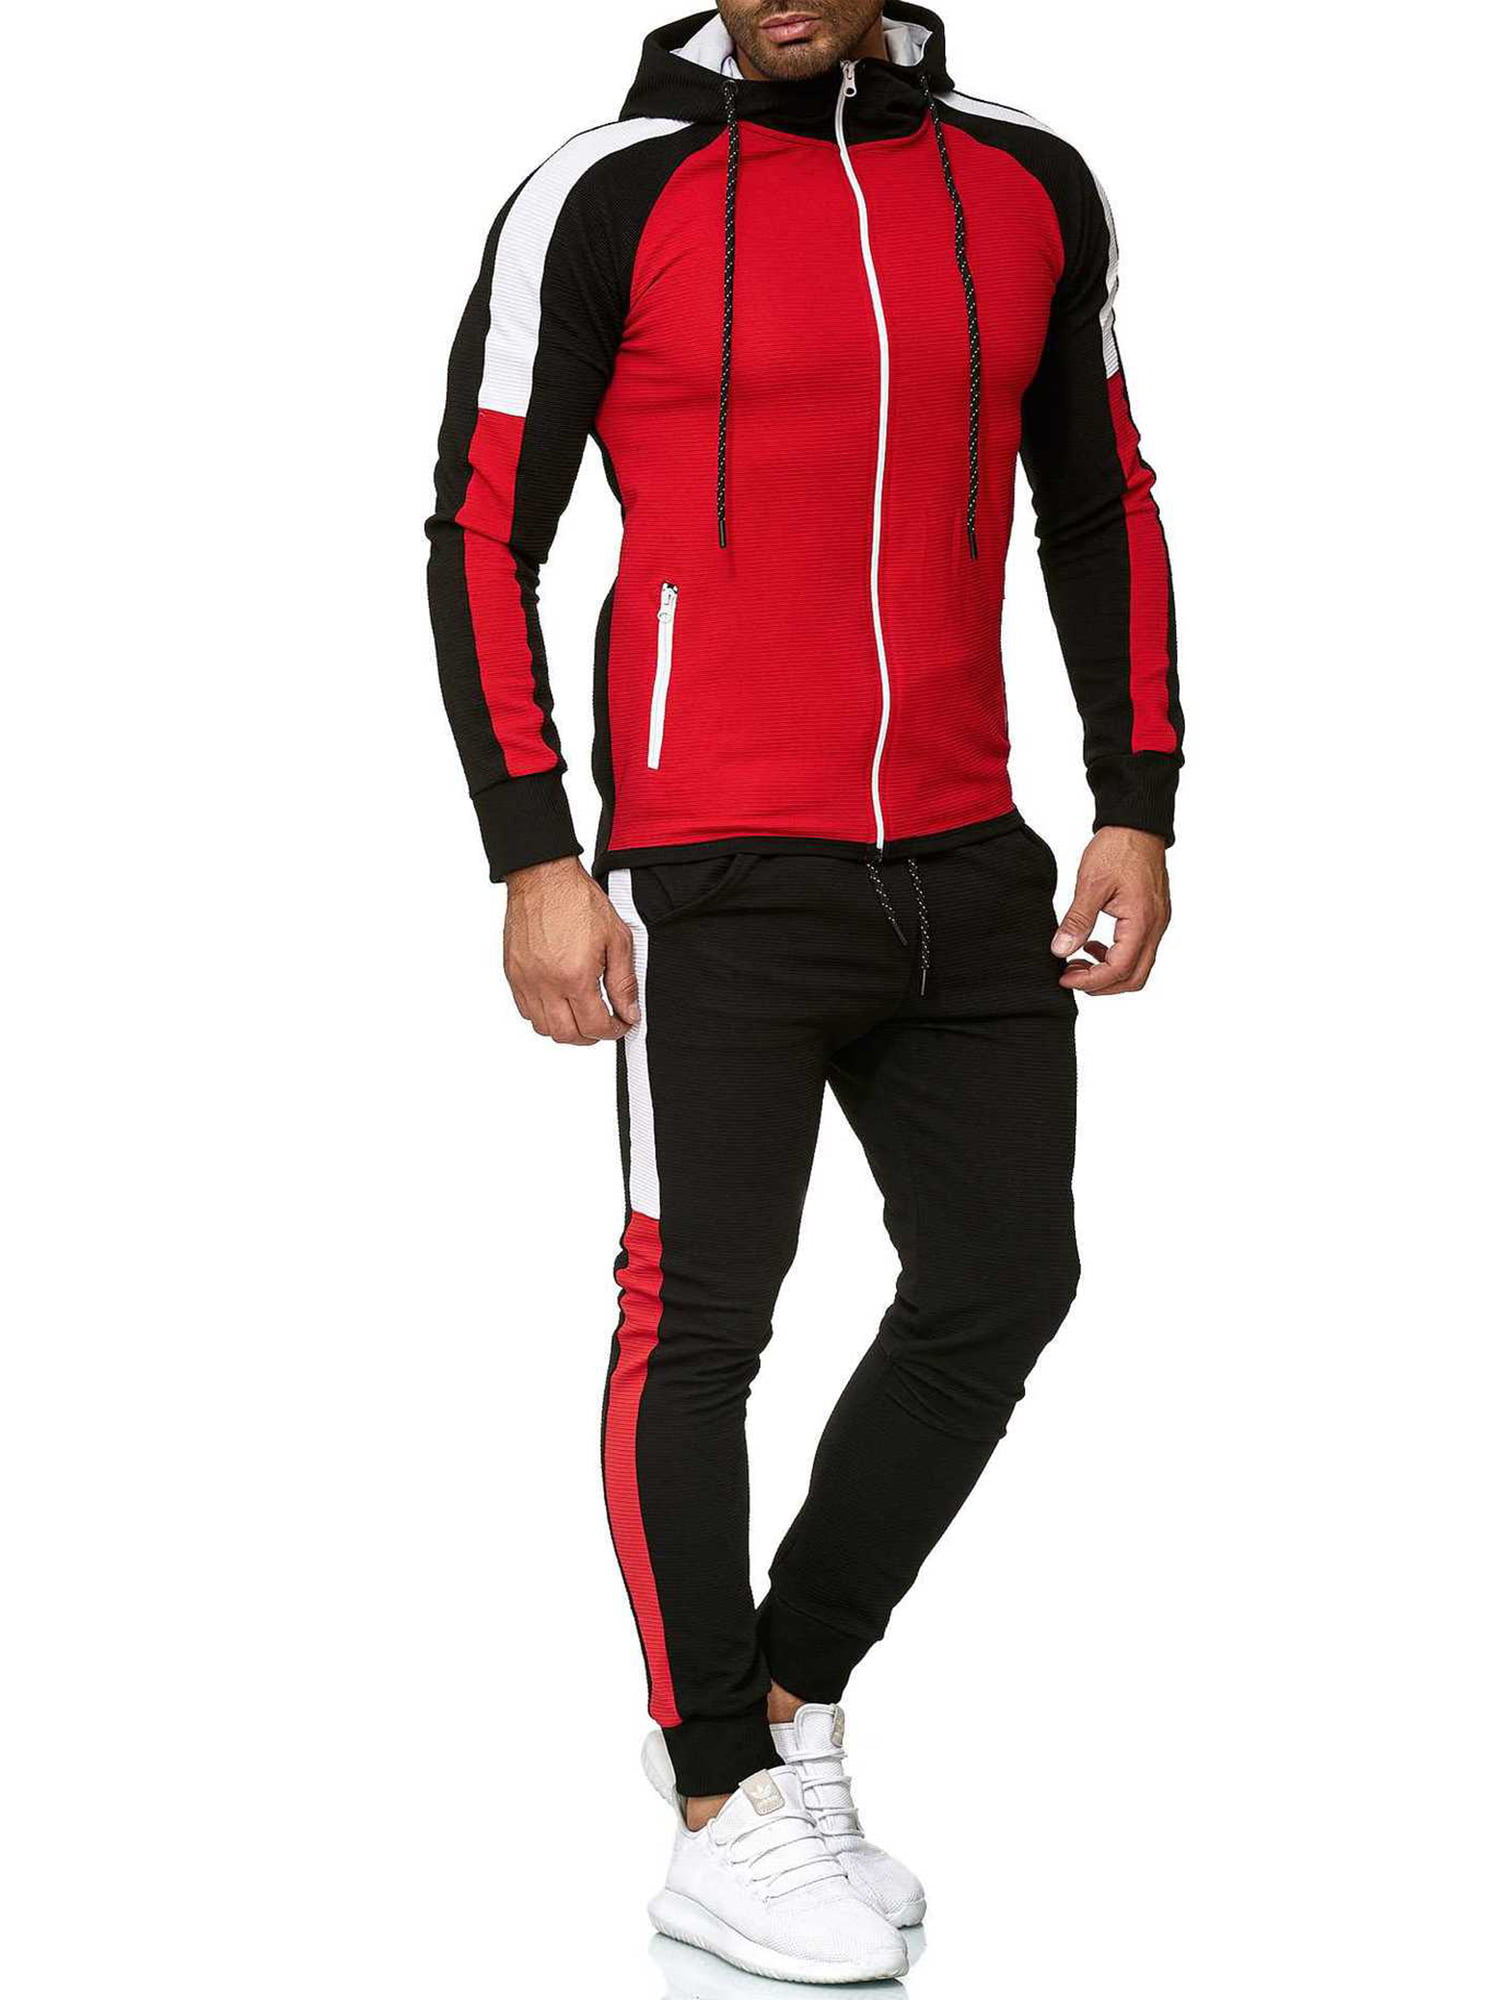 Exercise Goutique Men's Athletic Tracksuit Casual Full Zip Hoodies Sweatsuits 2 Pieces Jogging Suits for Running Fitness